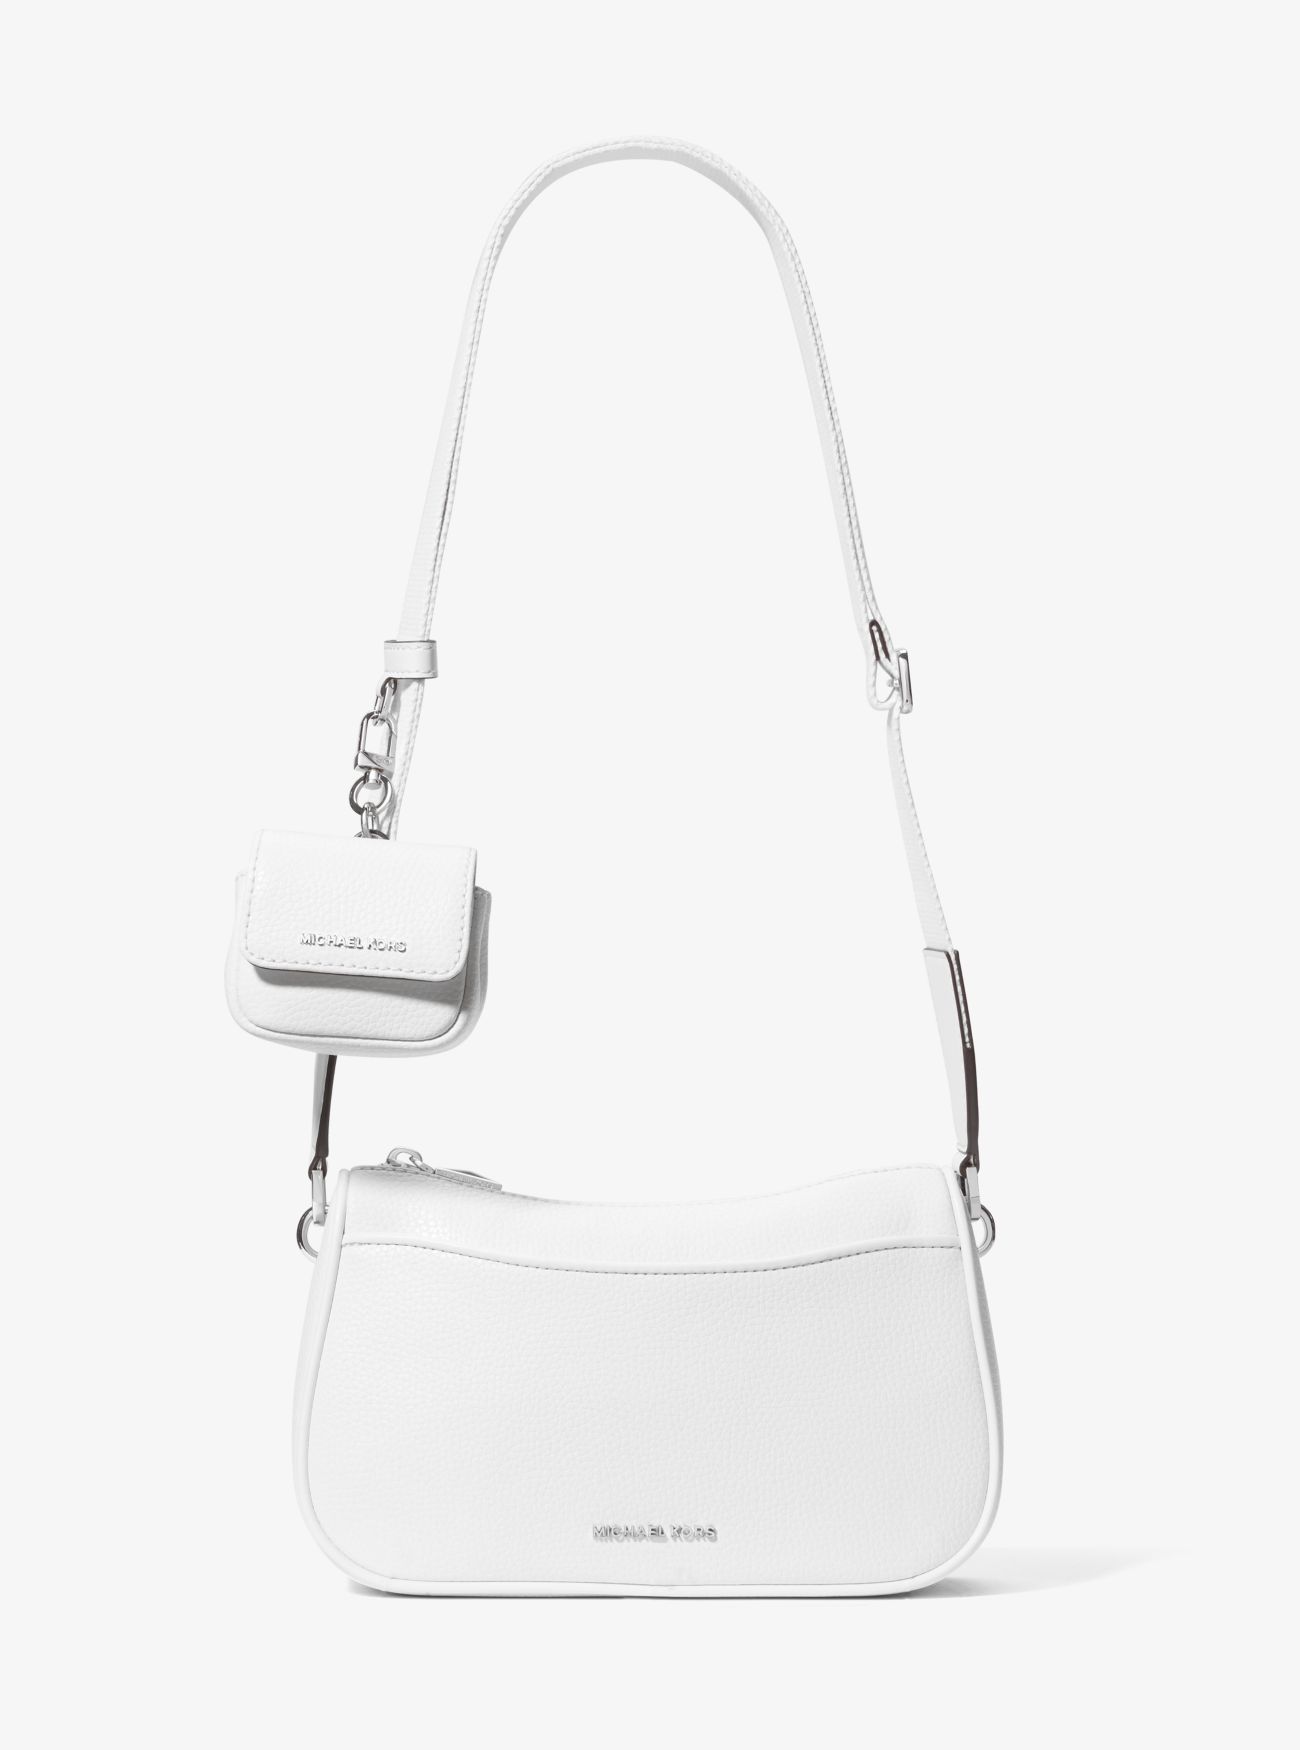 MK Jet Set Medium Pebbled Leather Crossbody Bag with Case for Apple AirPods ProÂ® - White - Michael Kors